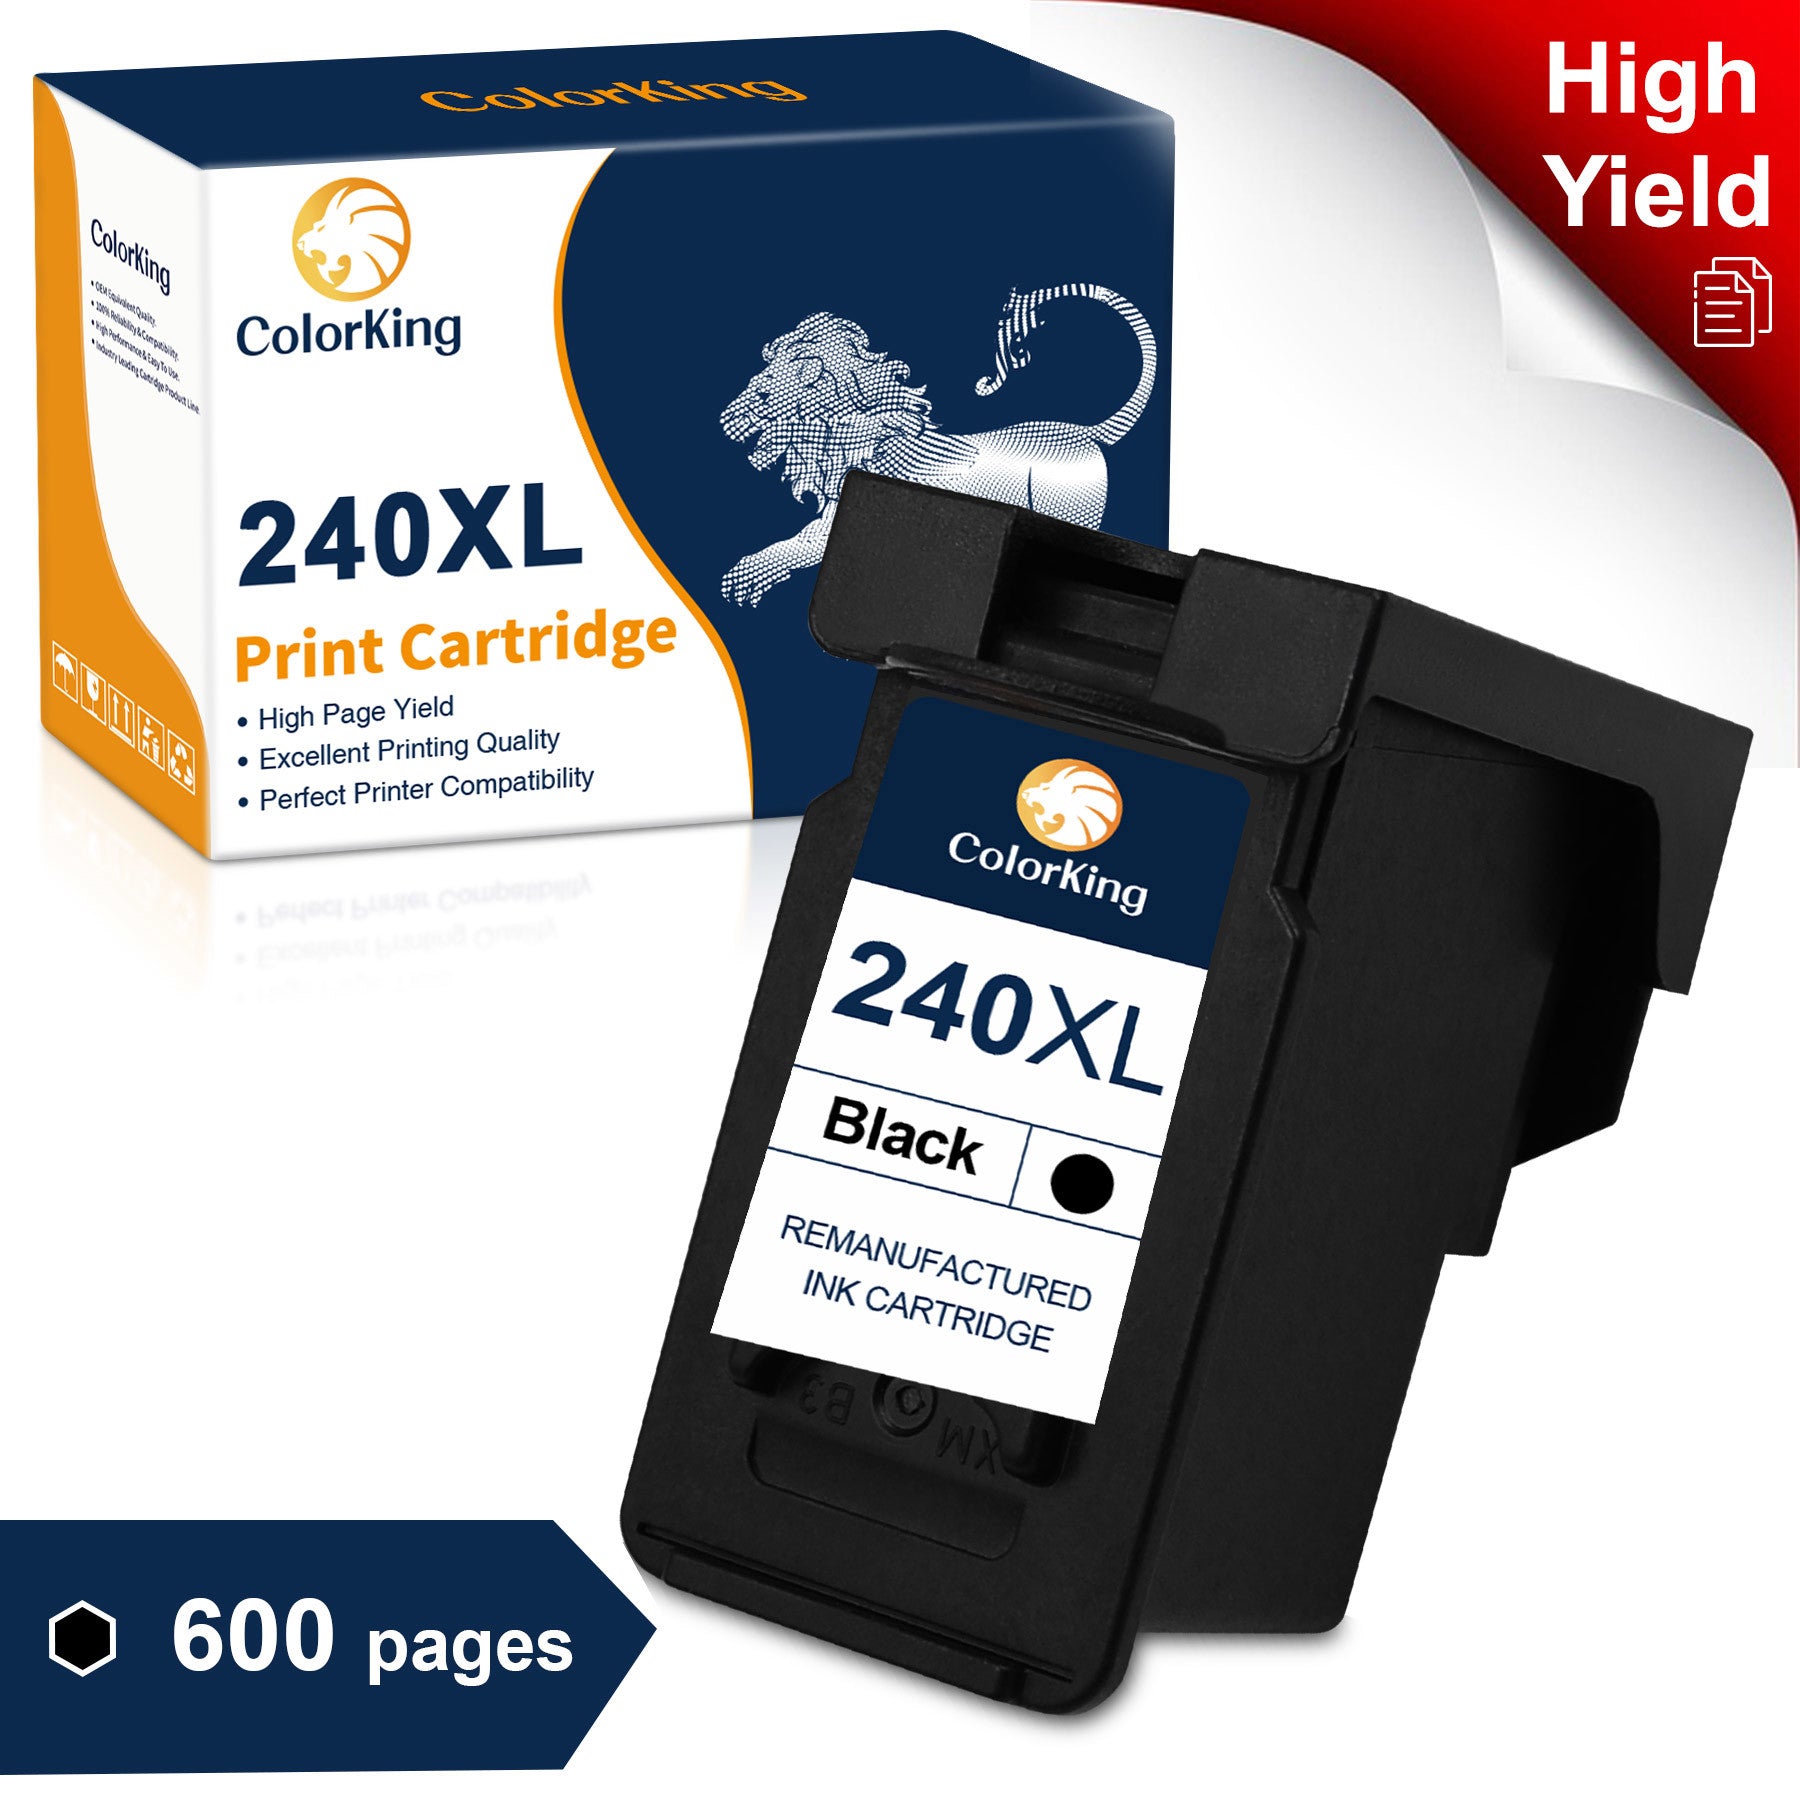 240 XL Black Ink Cartridge Replacement for Canon PG 240XL Black